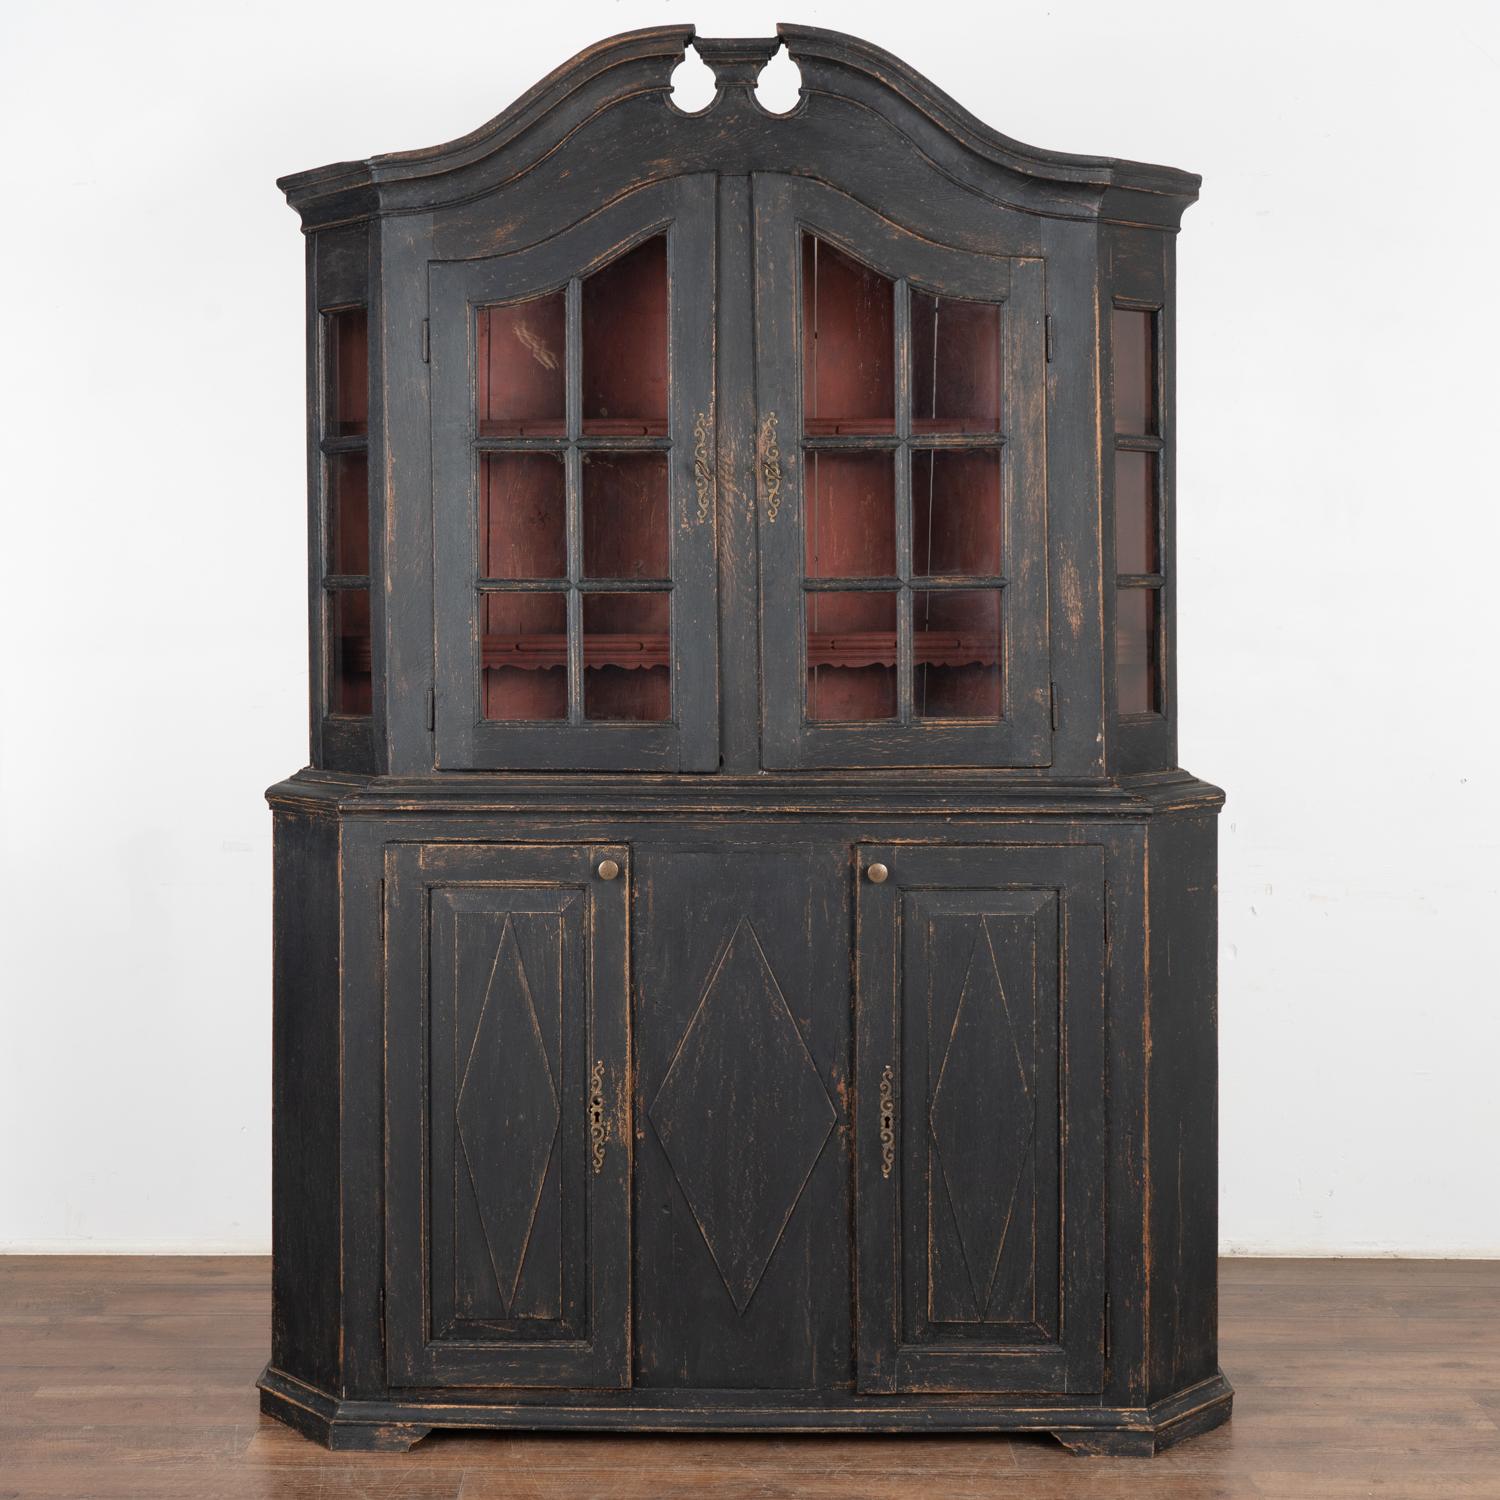 Danish Black Painted Display Cabinet Bookcase with Glass Doors, Denmark circa 1770 For Sale